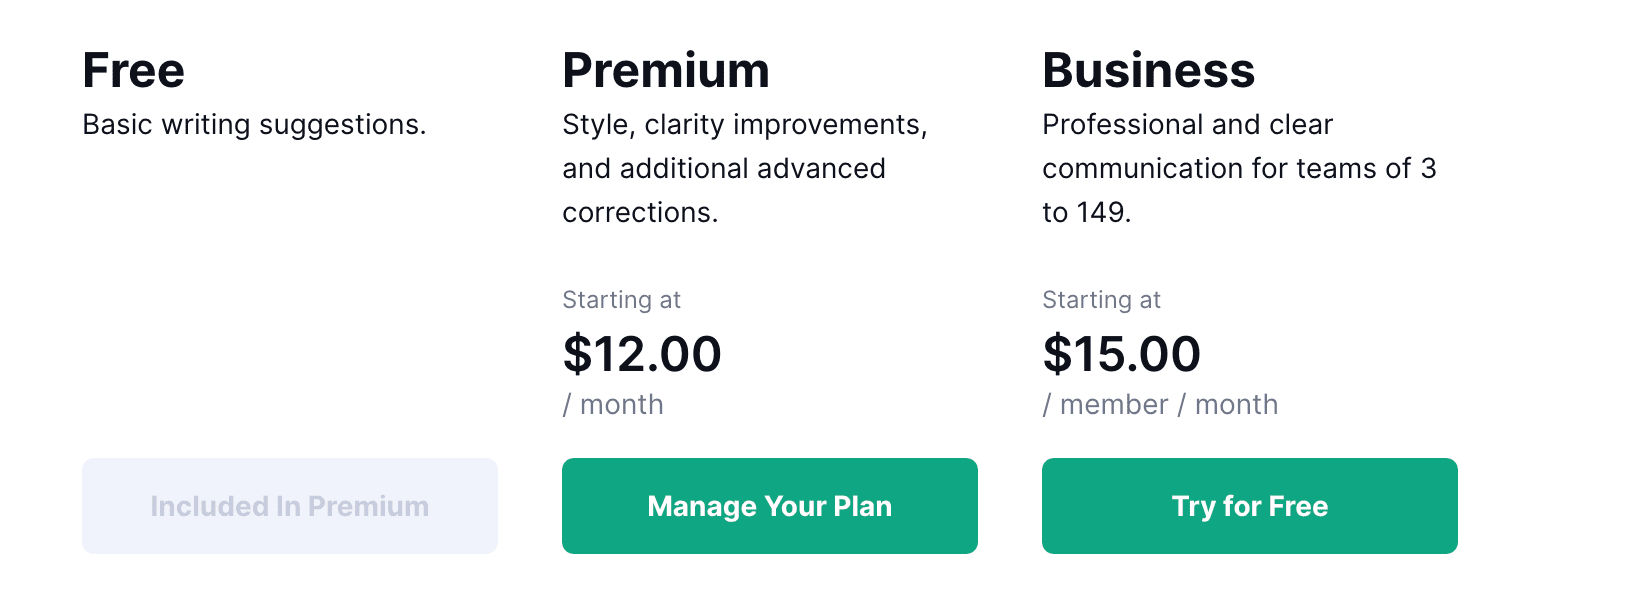 grammarly pricing | TOrie Mathis